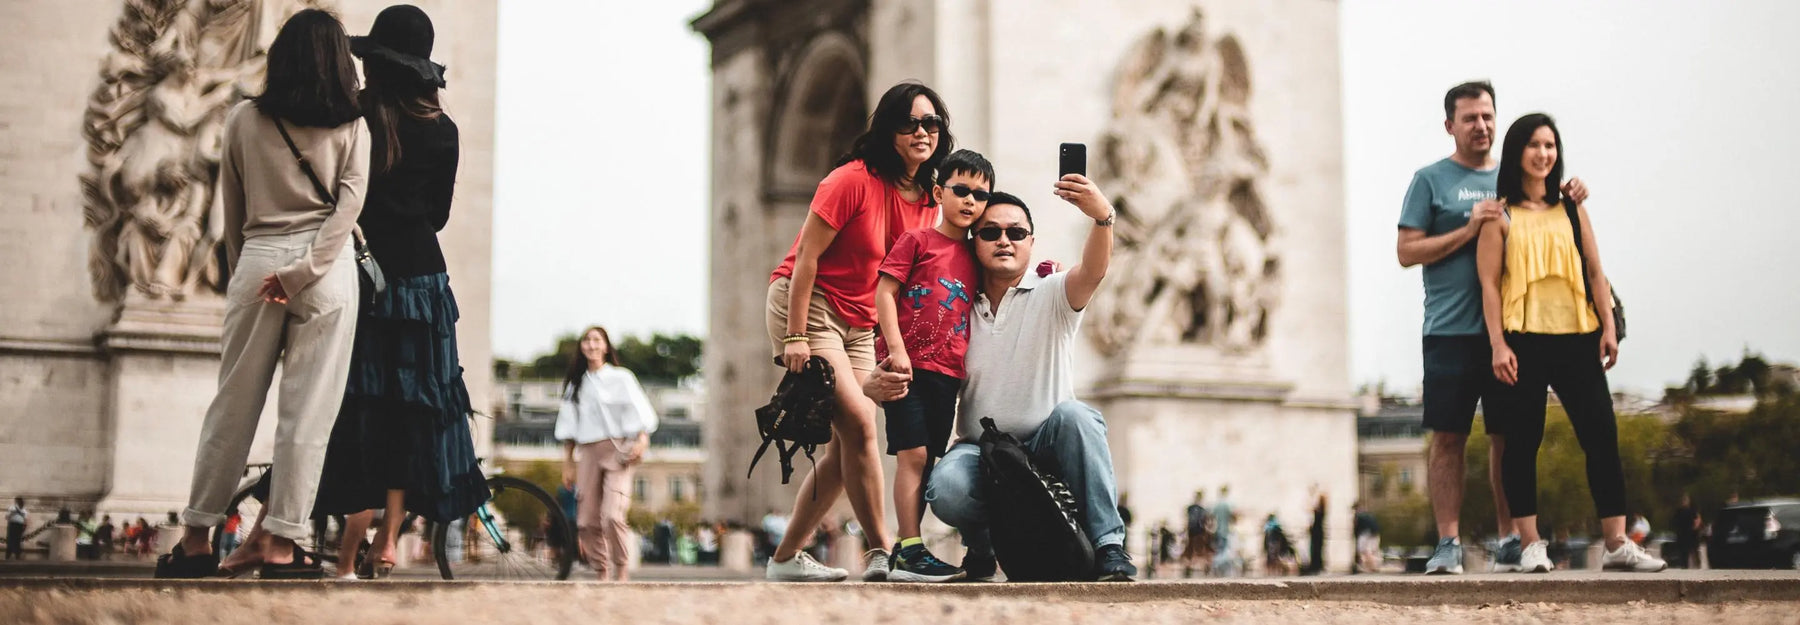 Why You Should Travel With Your Family